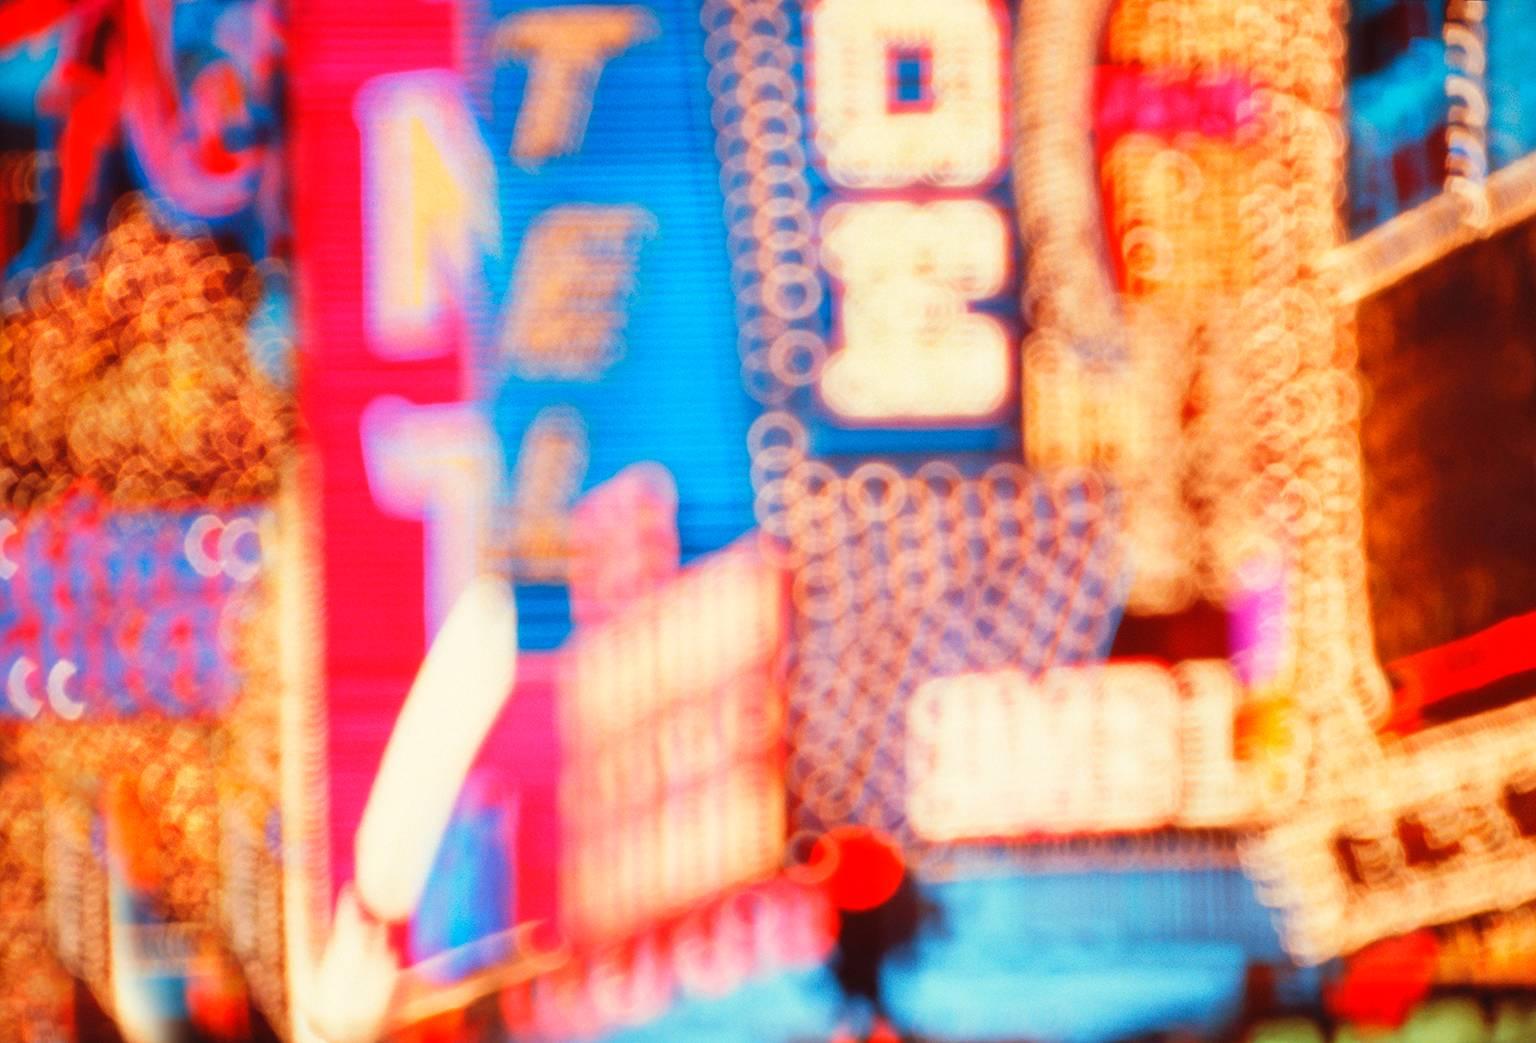 Mitchell Funk Color Photograph - The Fremont Sign, Las Vegas, 1974, Abstract Photography